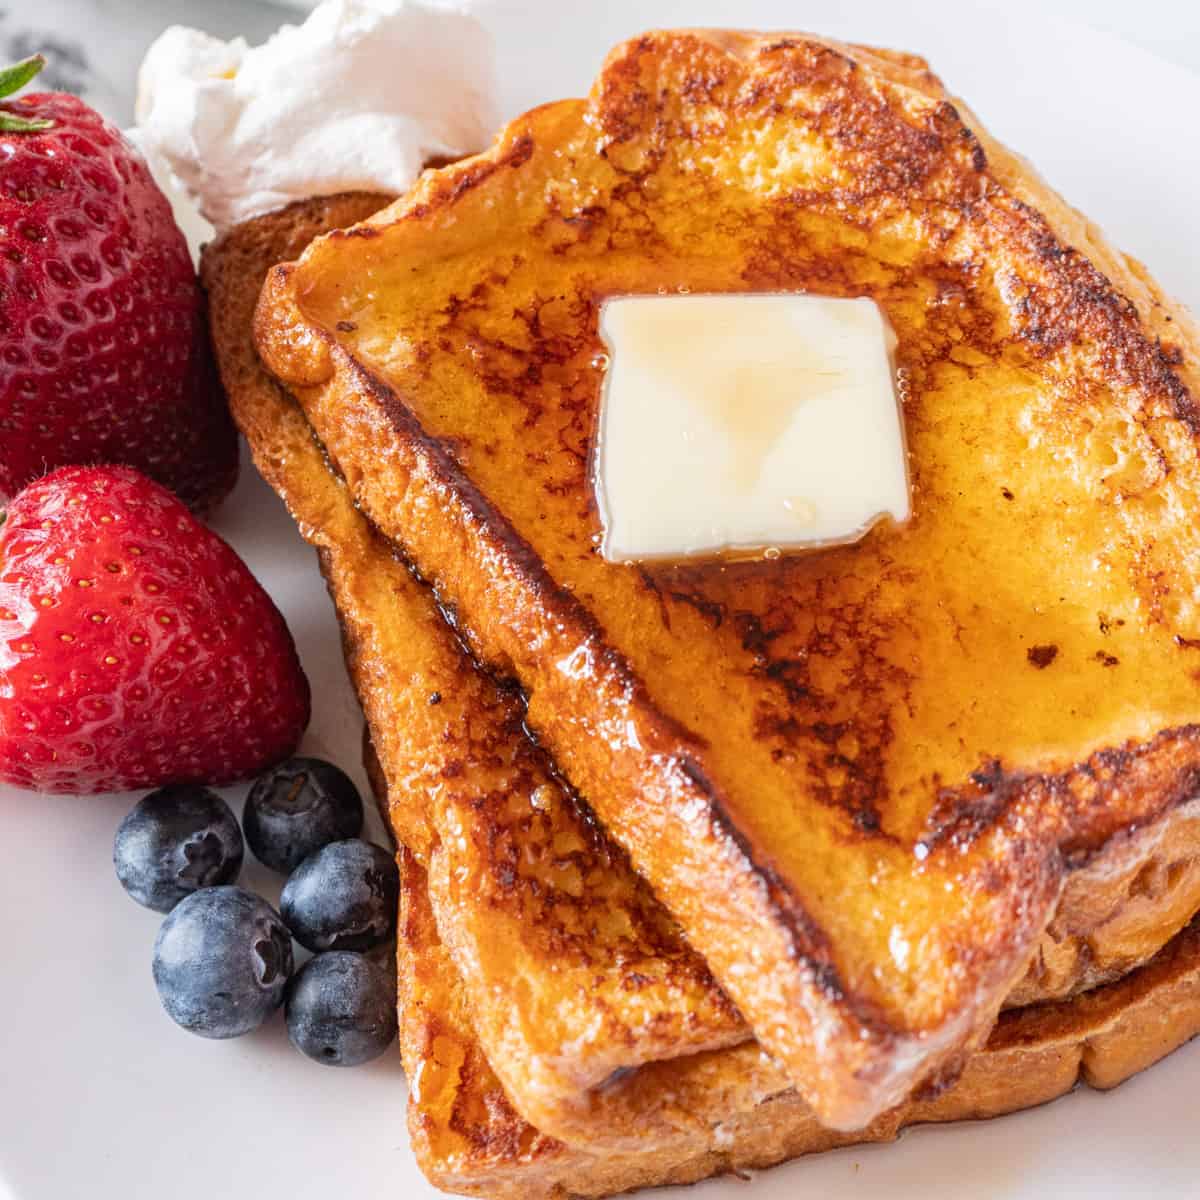 featured french toast image- french toast with butter and berries and syrup on a plate